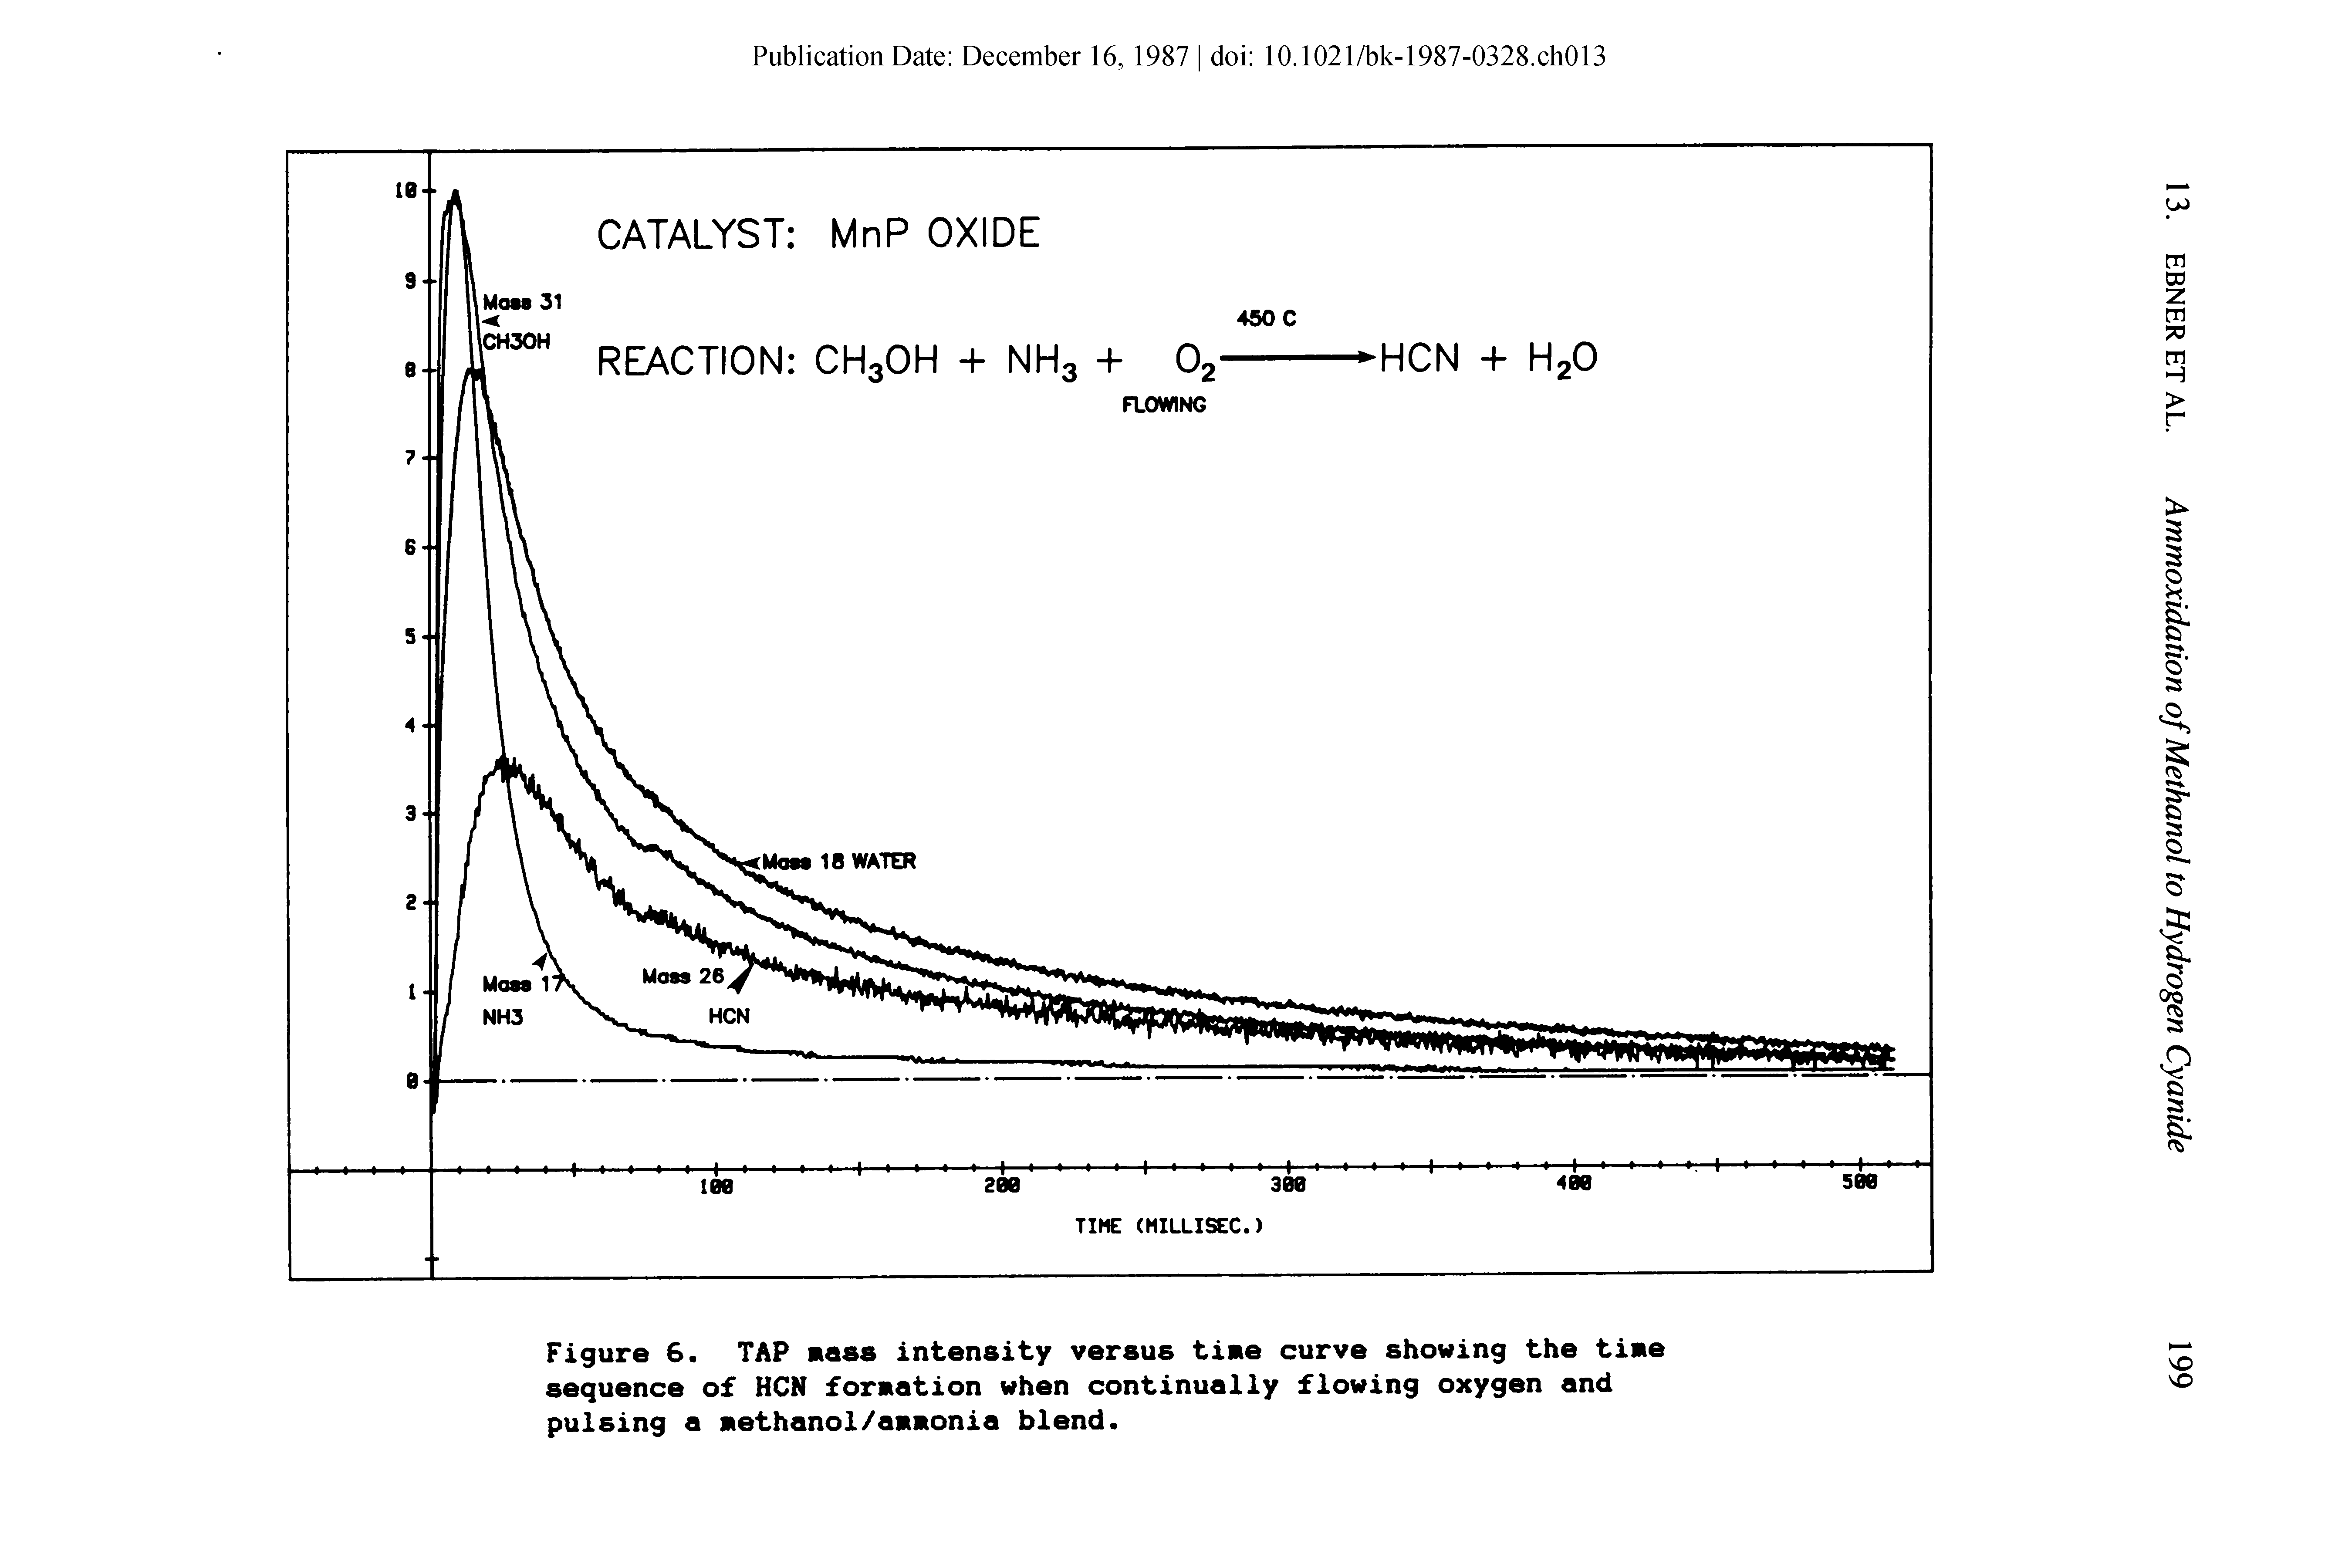 Figure 6. TAP mess intensity versus time curve showing the time sequence of HCN formation when continually flowing oxygen and pulsing a methanol/ammonia blend.